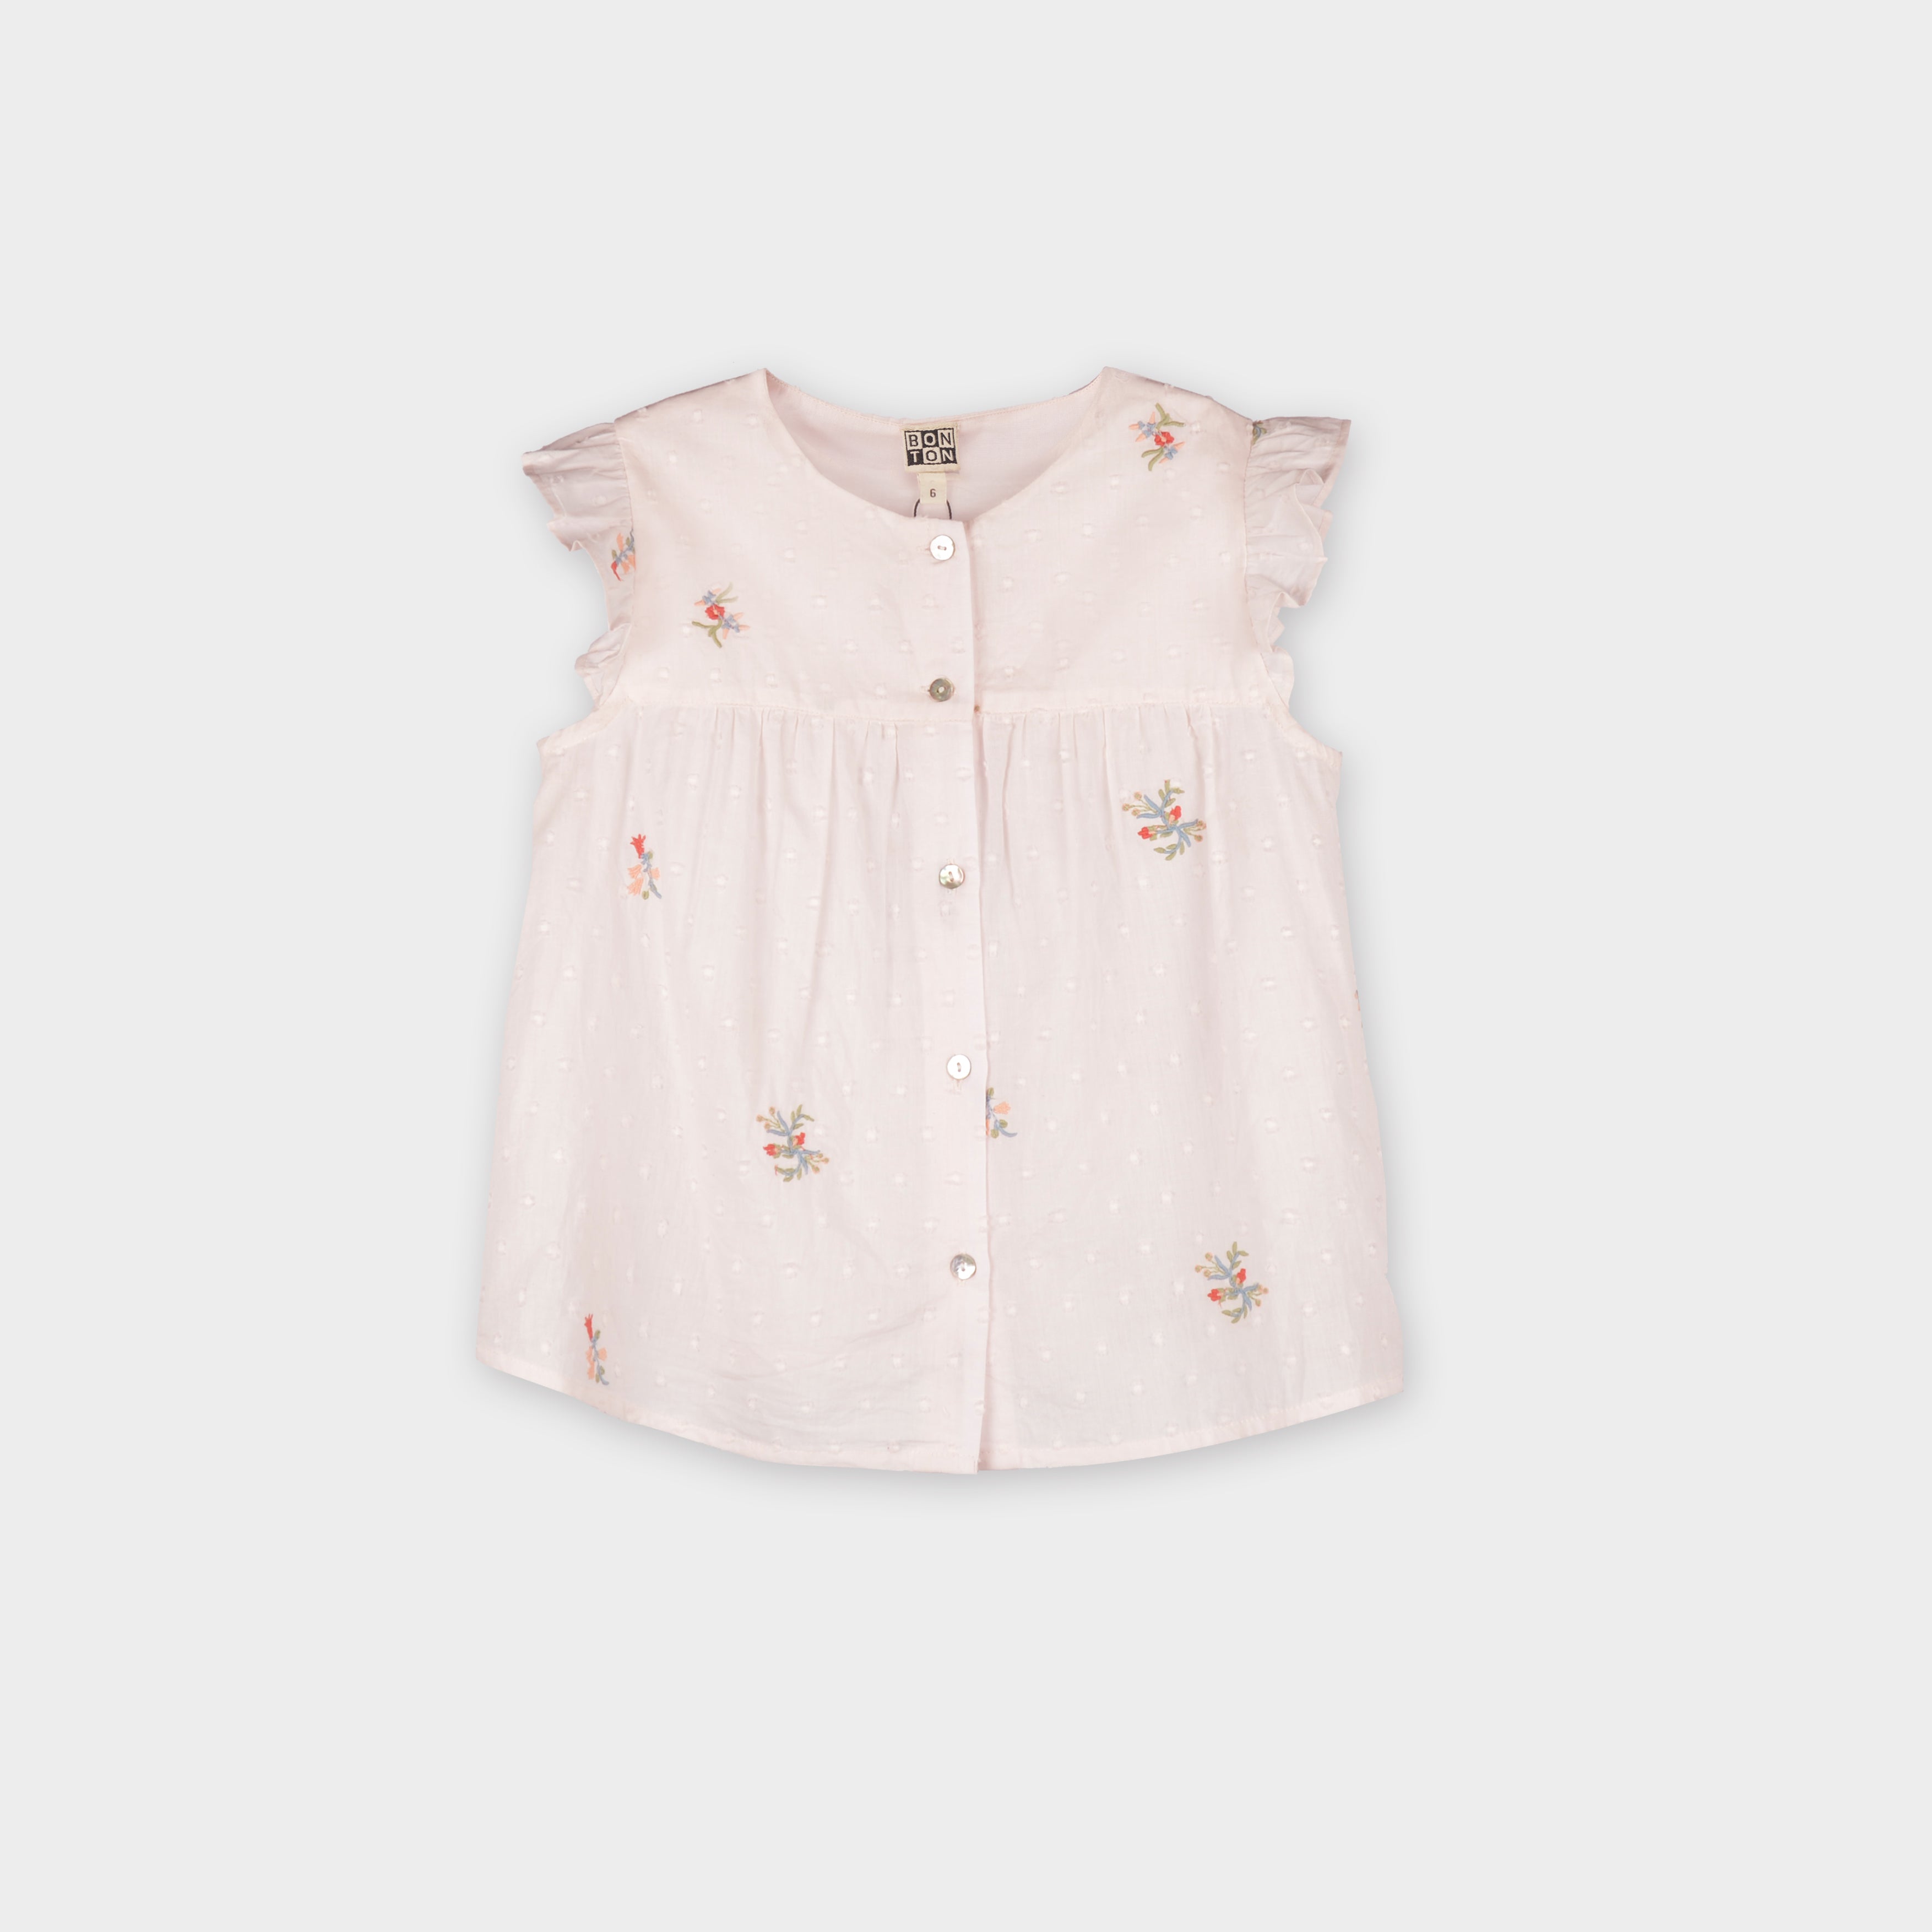 Girls Pink Embroidered Cotton Top